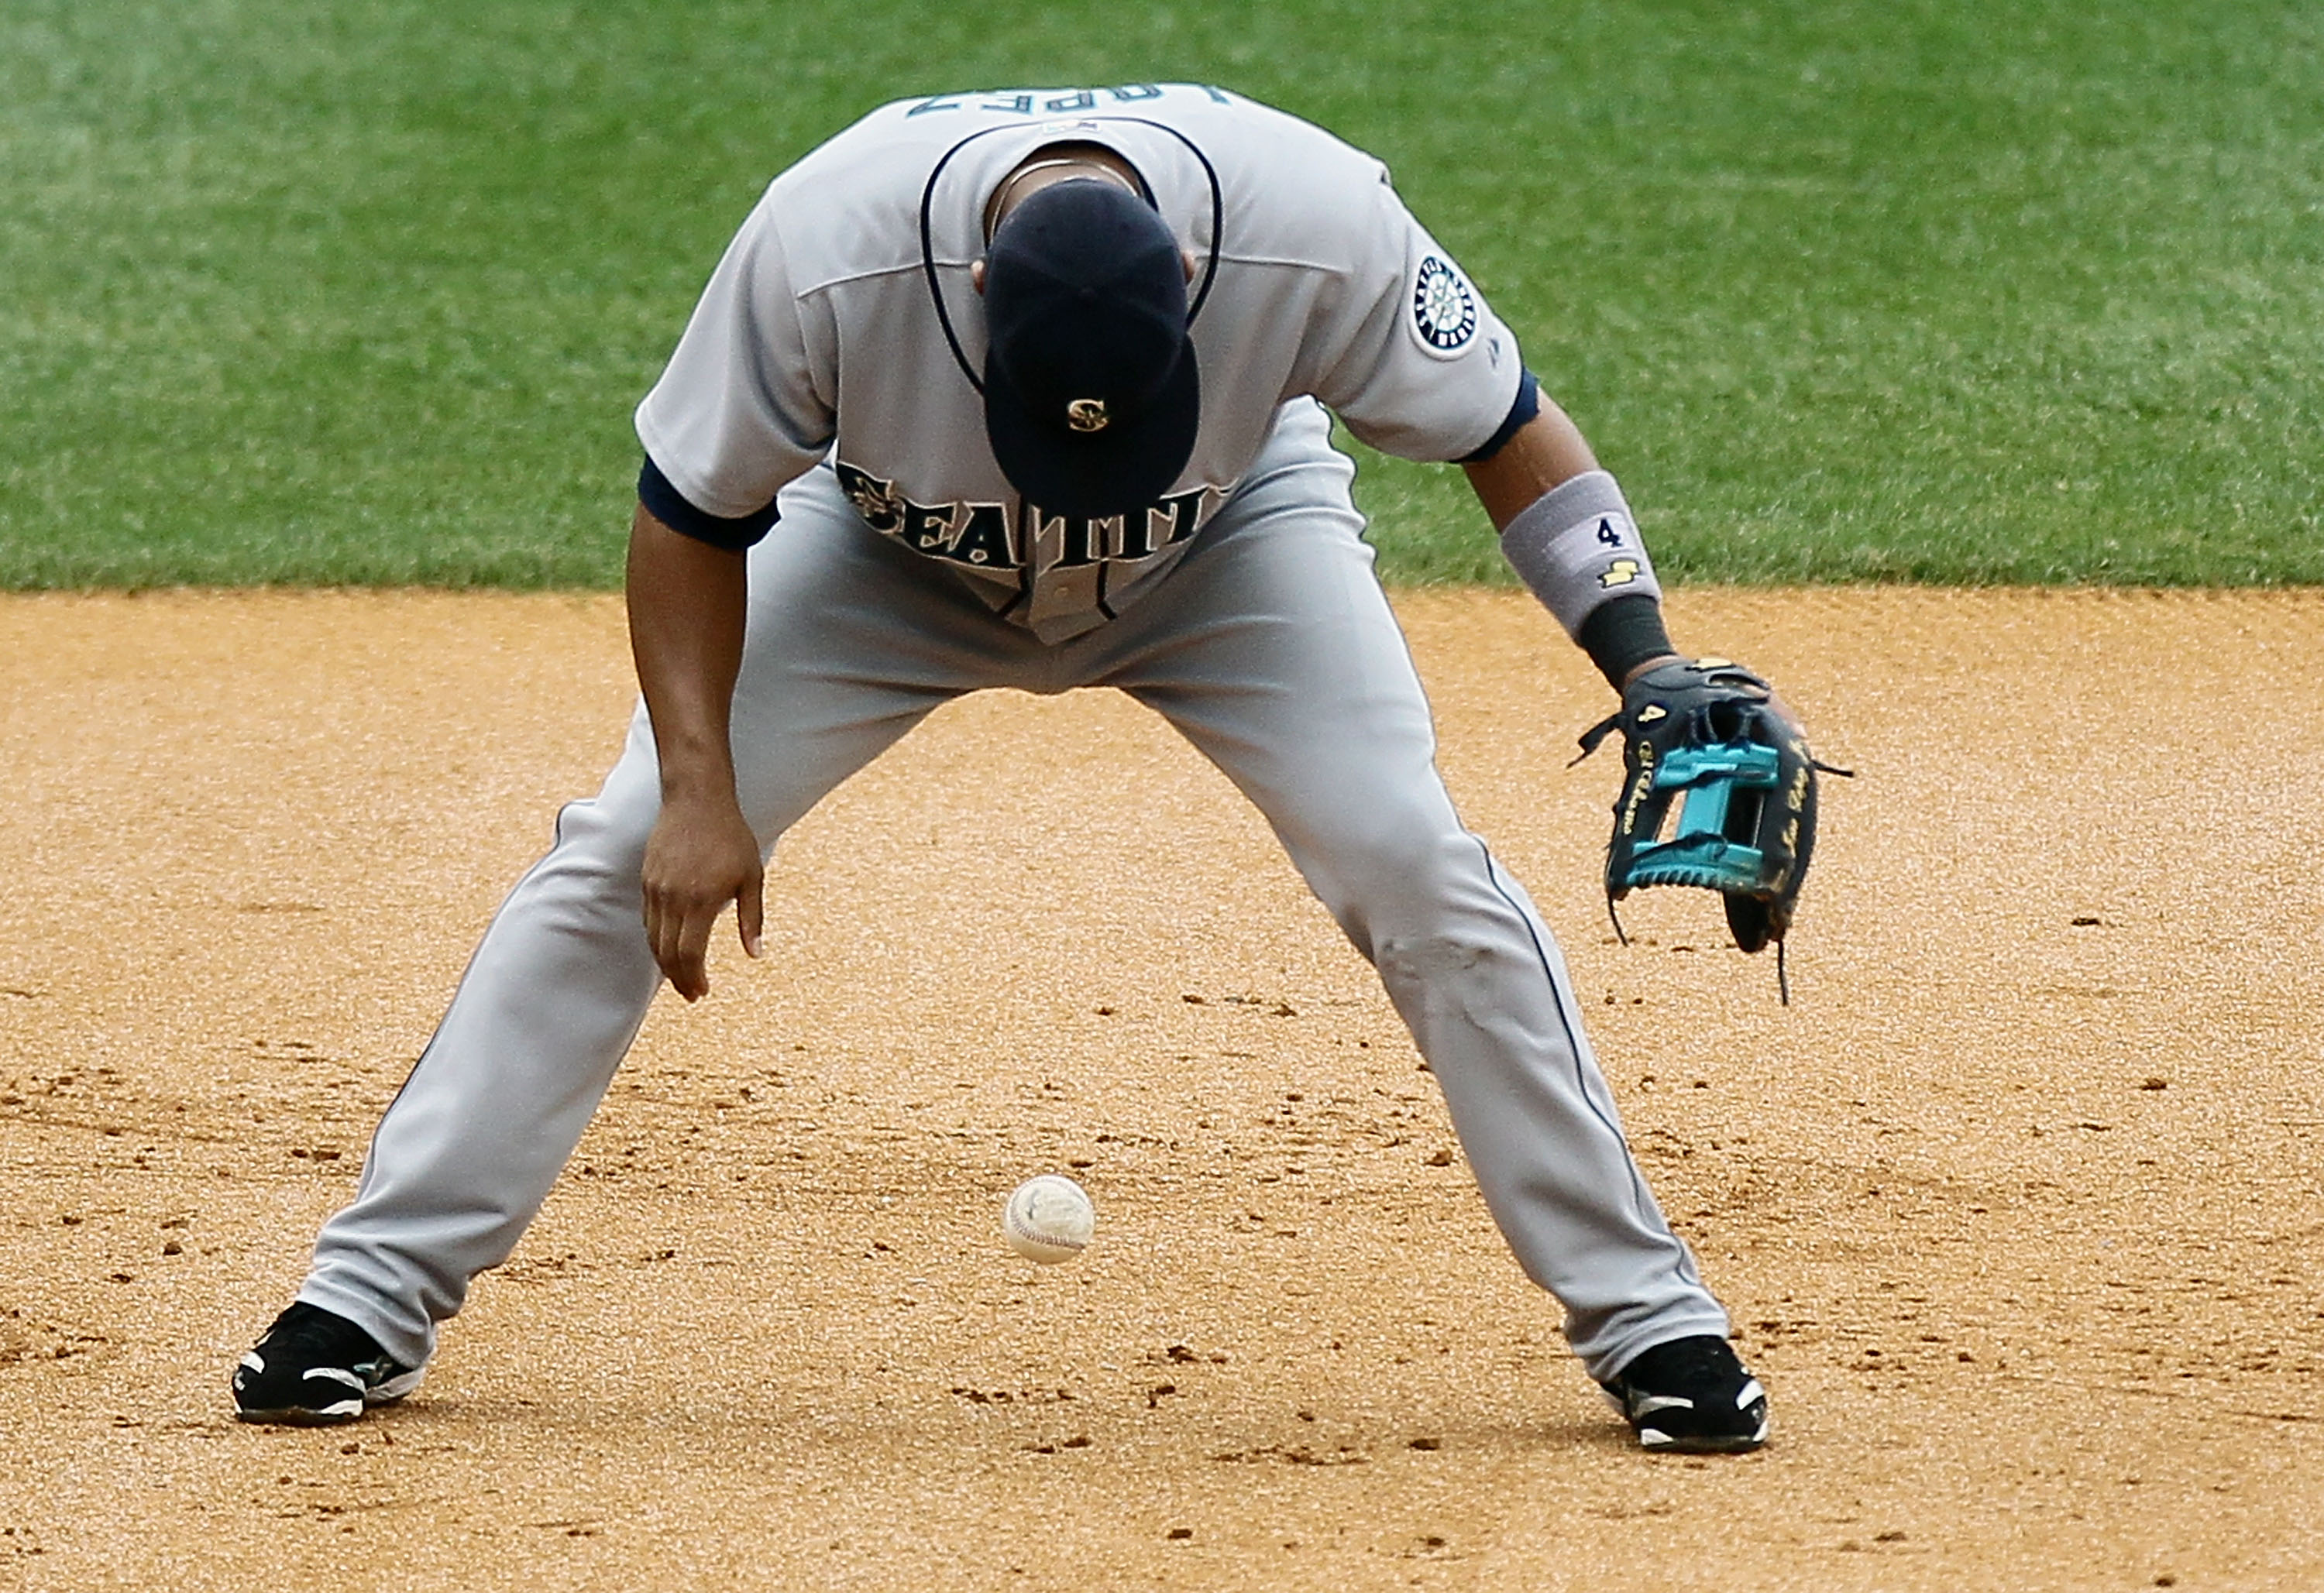 NEW YORK - AUGUST 22:  Jose Lopez #4 of the Seattle Mariners commits a fielding error in the second inning against the New York Yankees on August 22, 2010 at Yankee Stadium in the Bronx borough of New York City.  (Photo by Jim McIsaac/Getty Images)